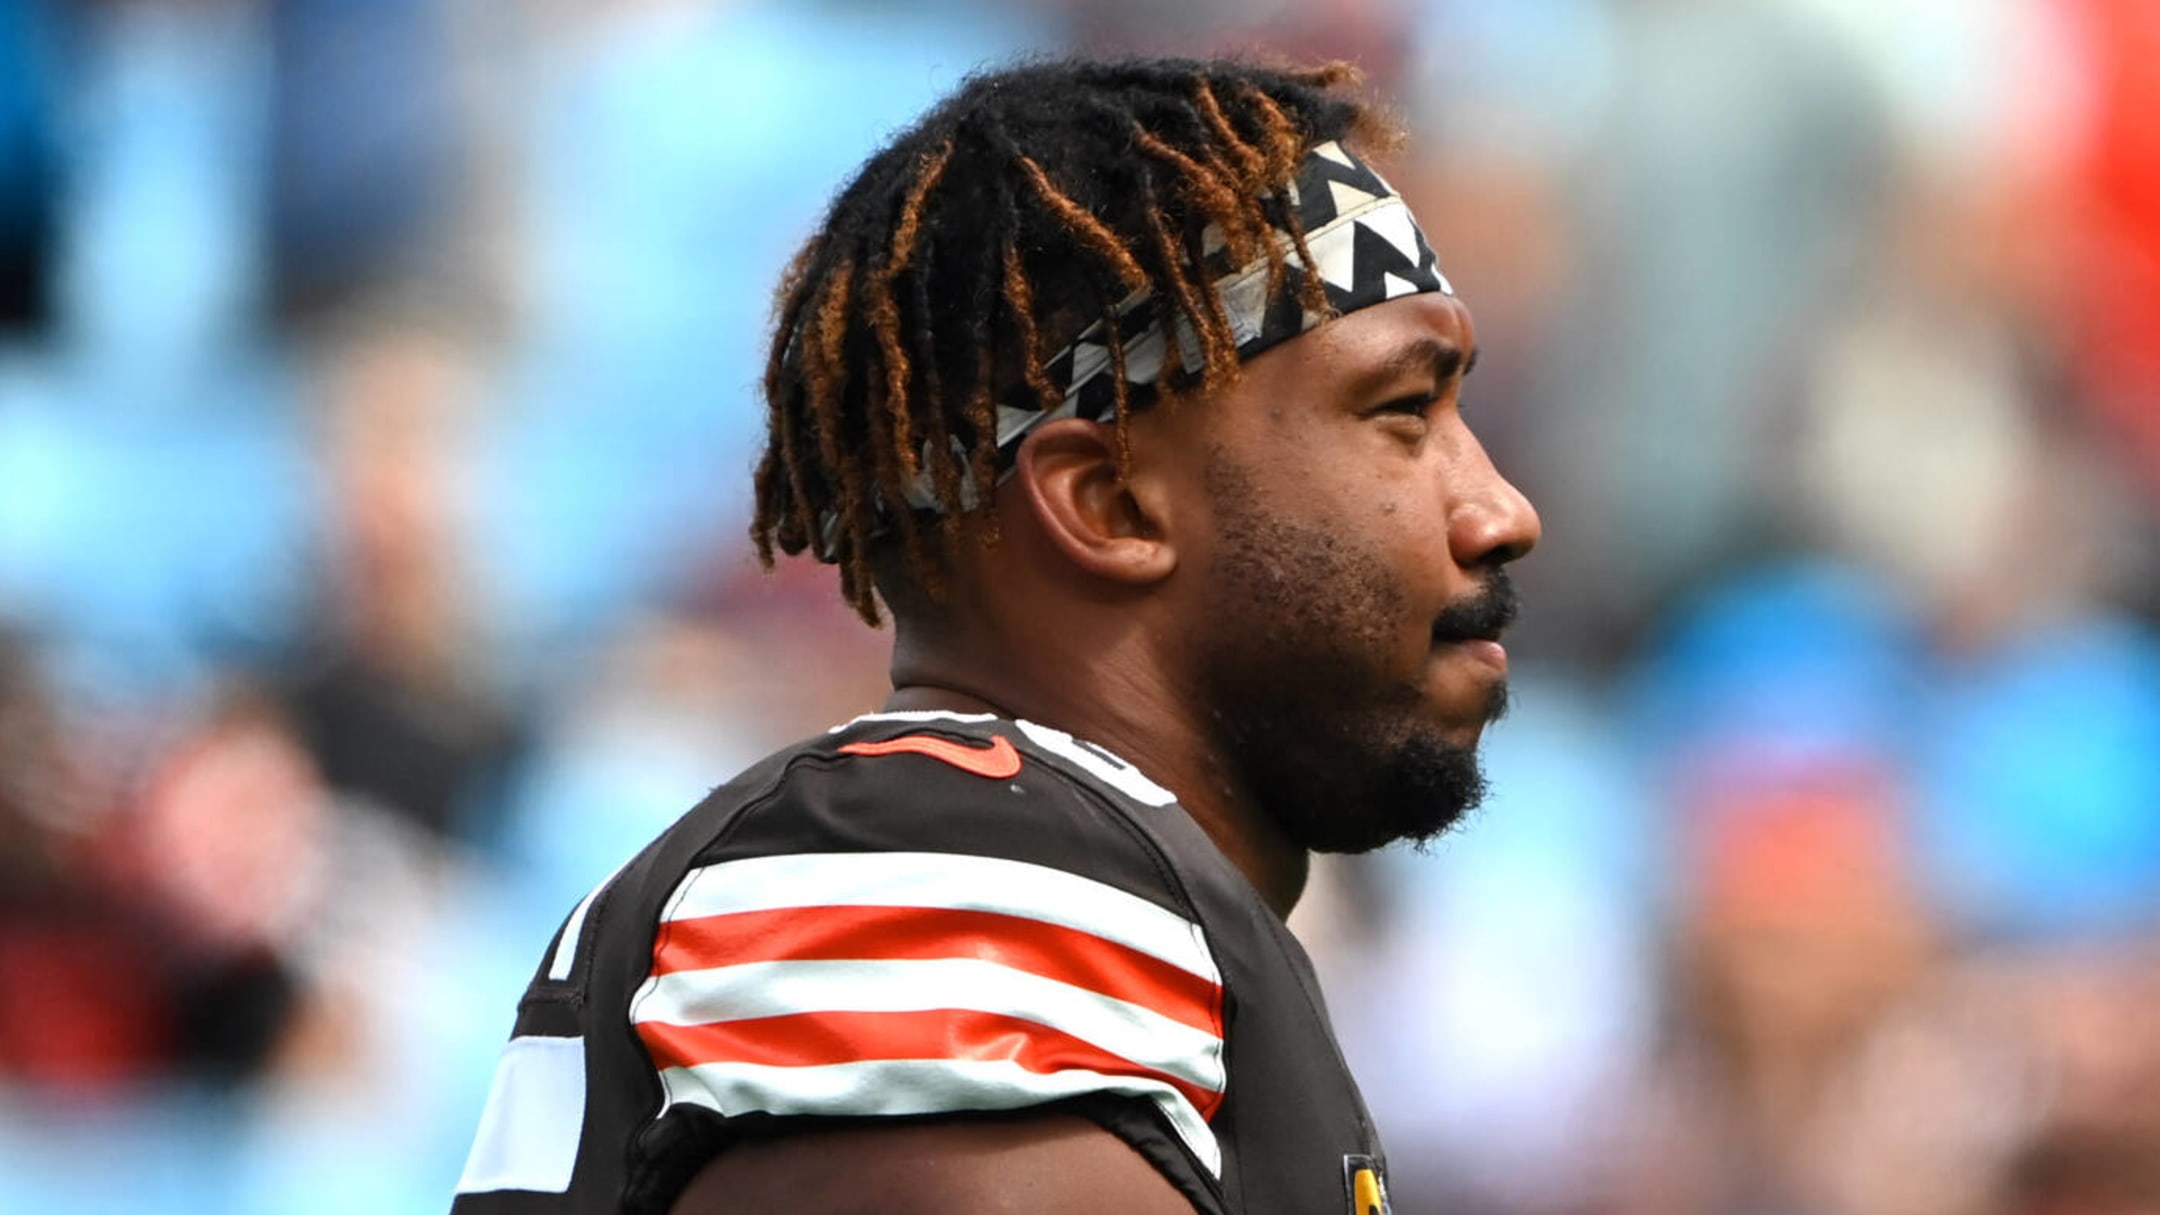 Myles Garrett released from hospital Monday night with non-life